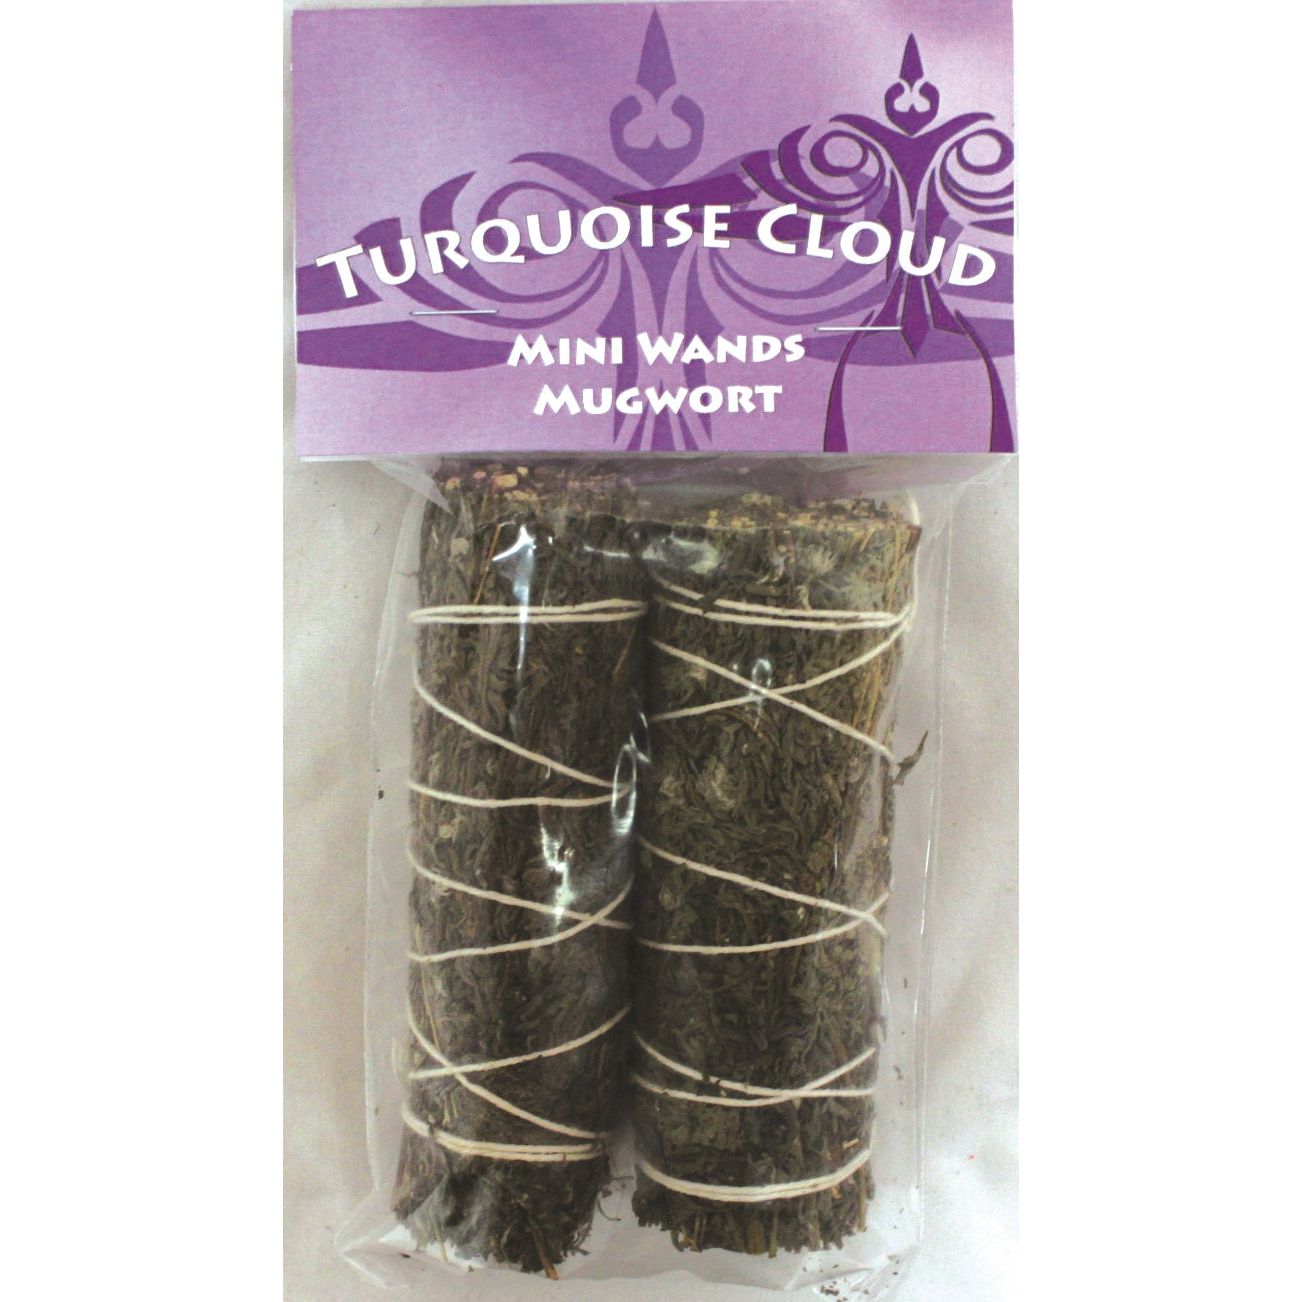 Turquoise Cloud Native American Products - Sage Wands, Mugwort